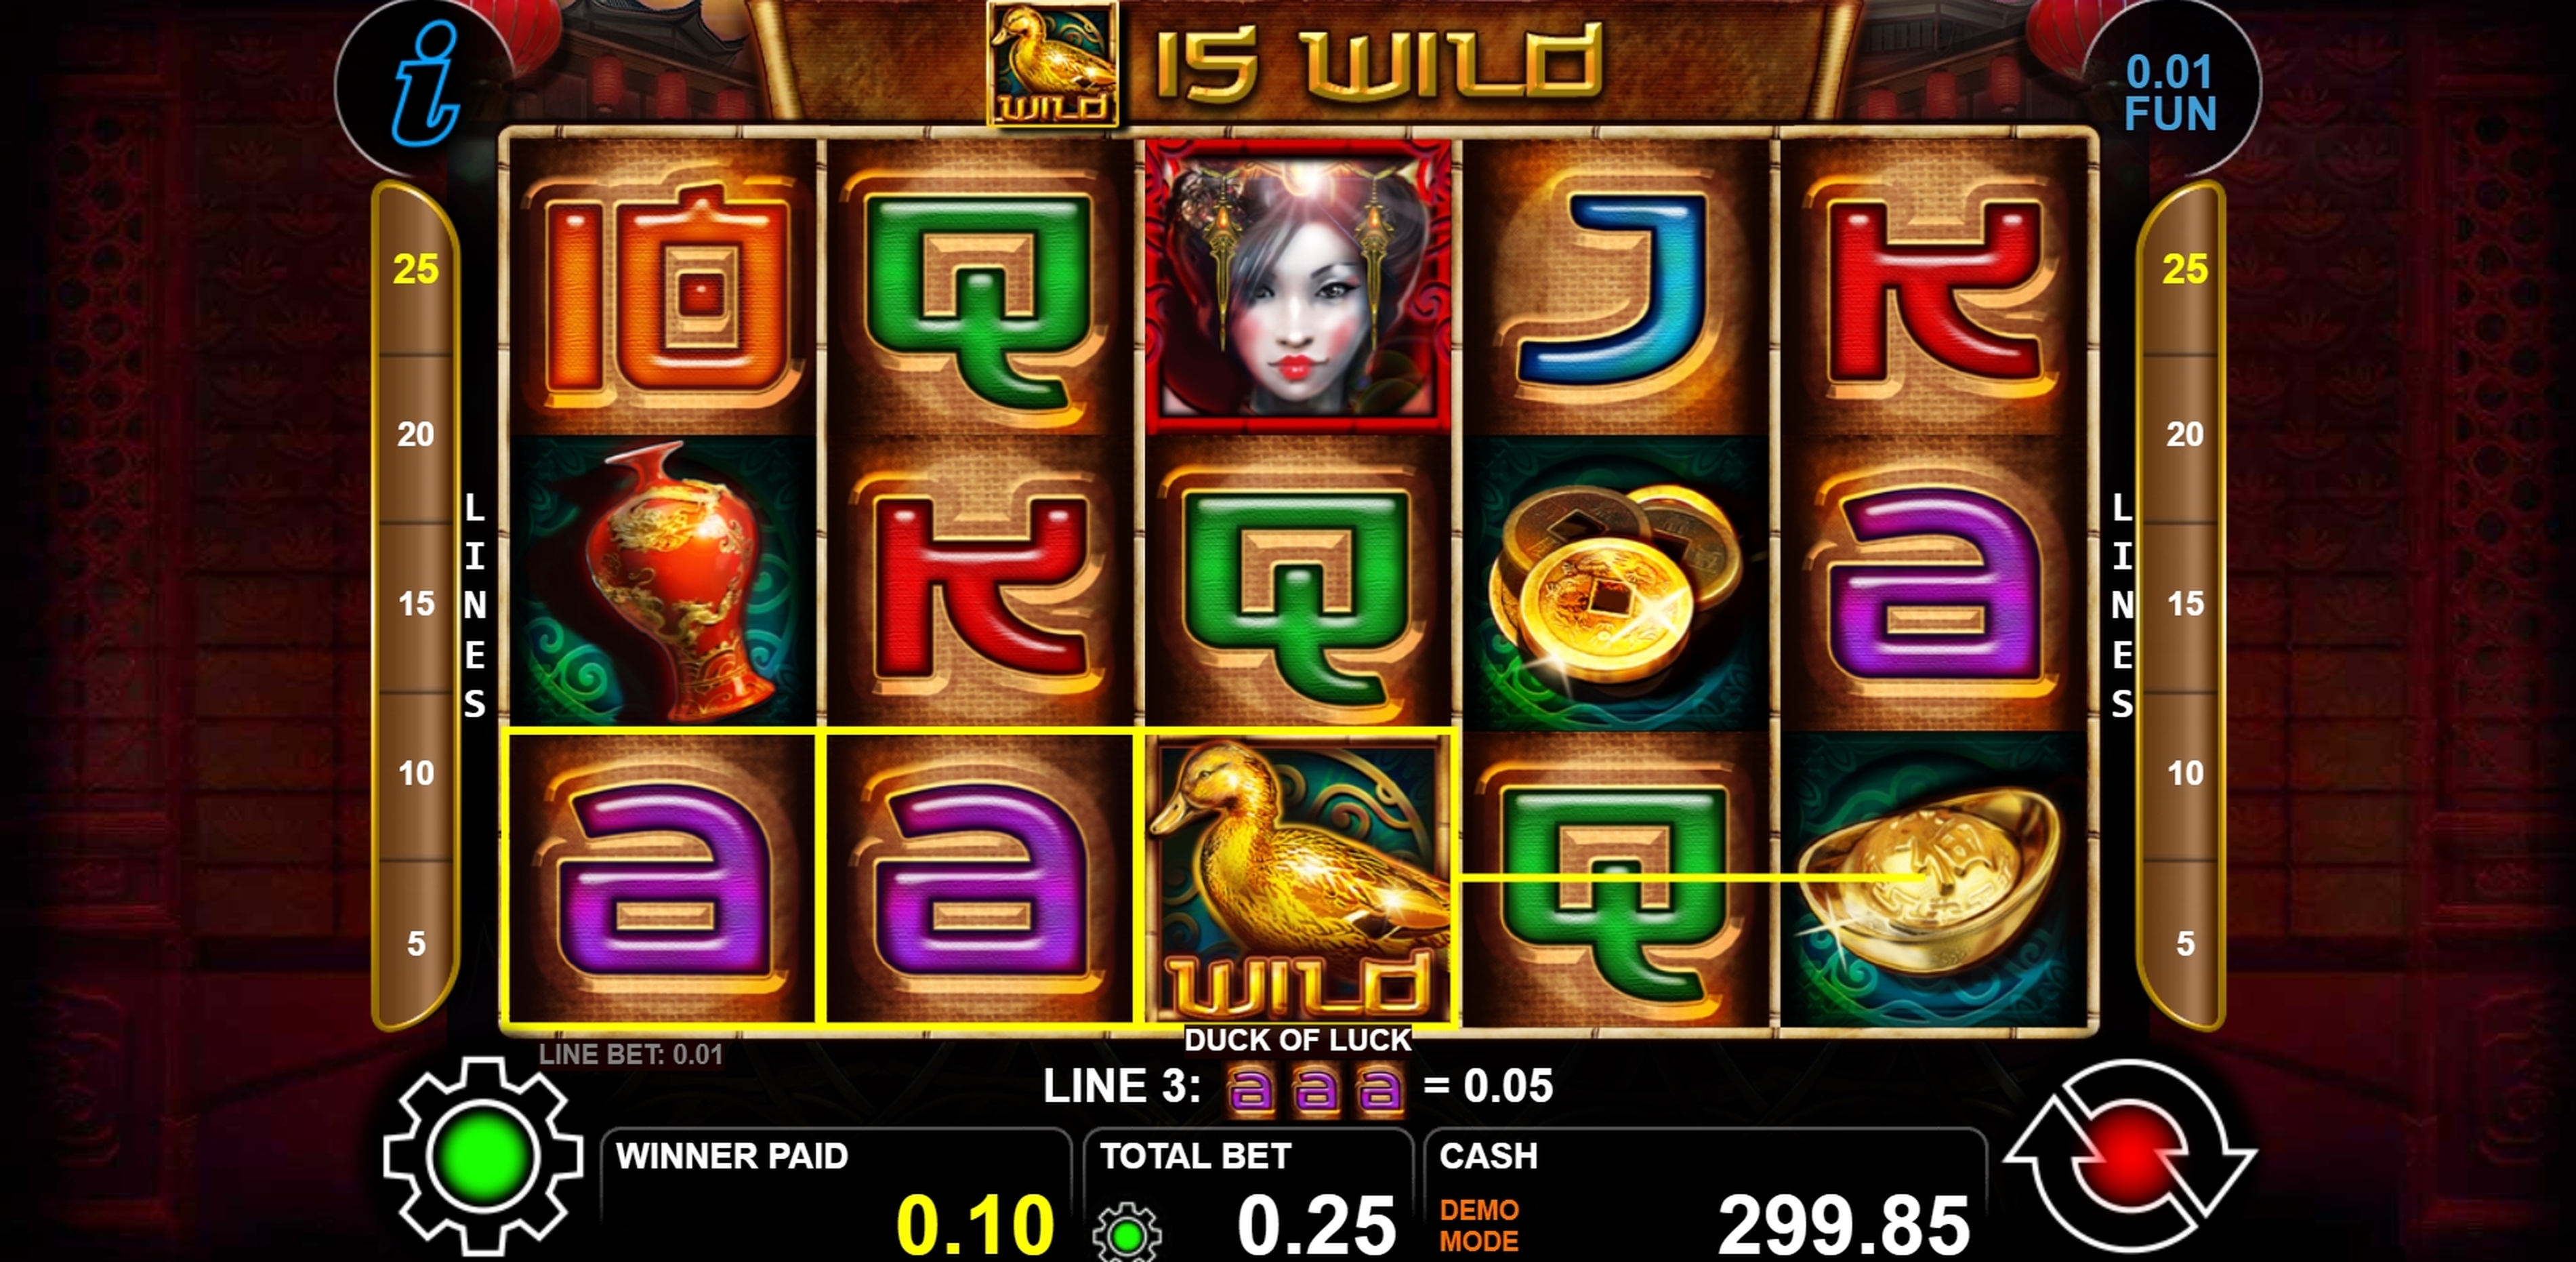 Win Money in Duck of Luck Free Slot Game by casino technology